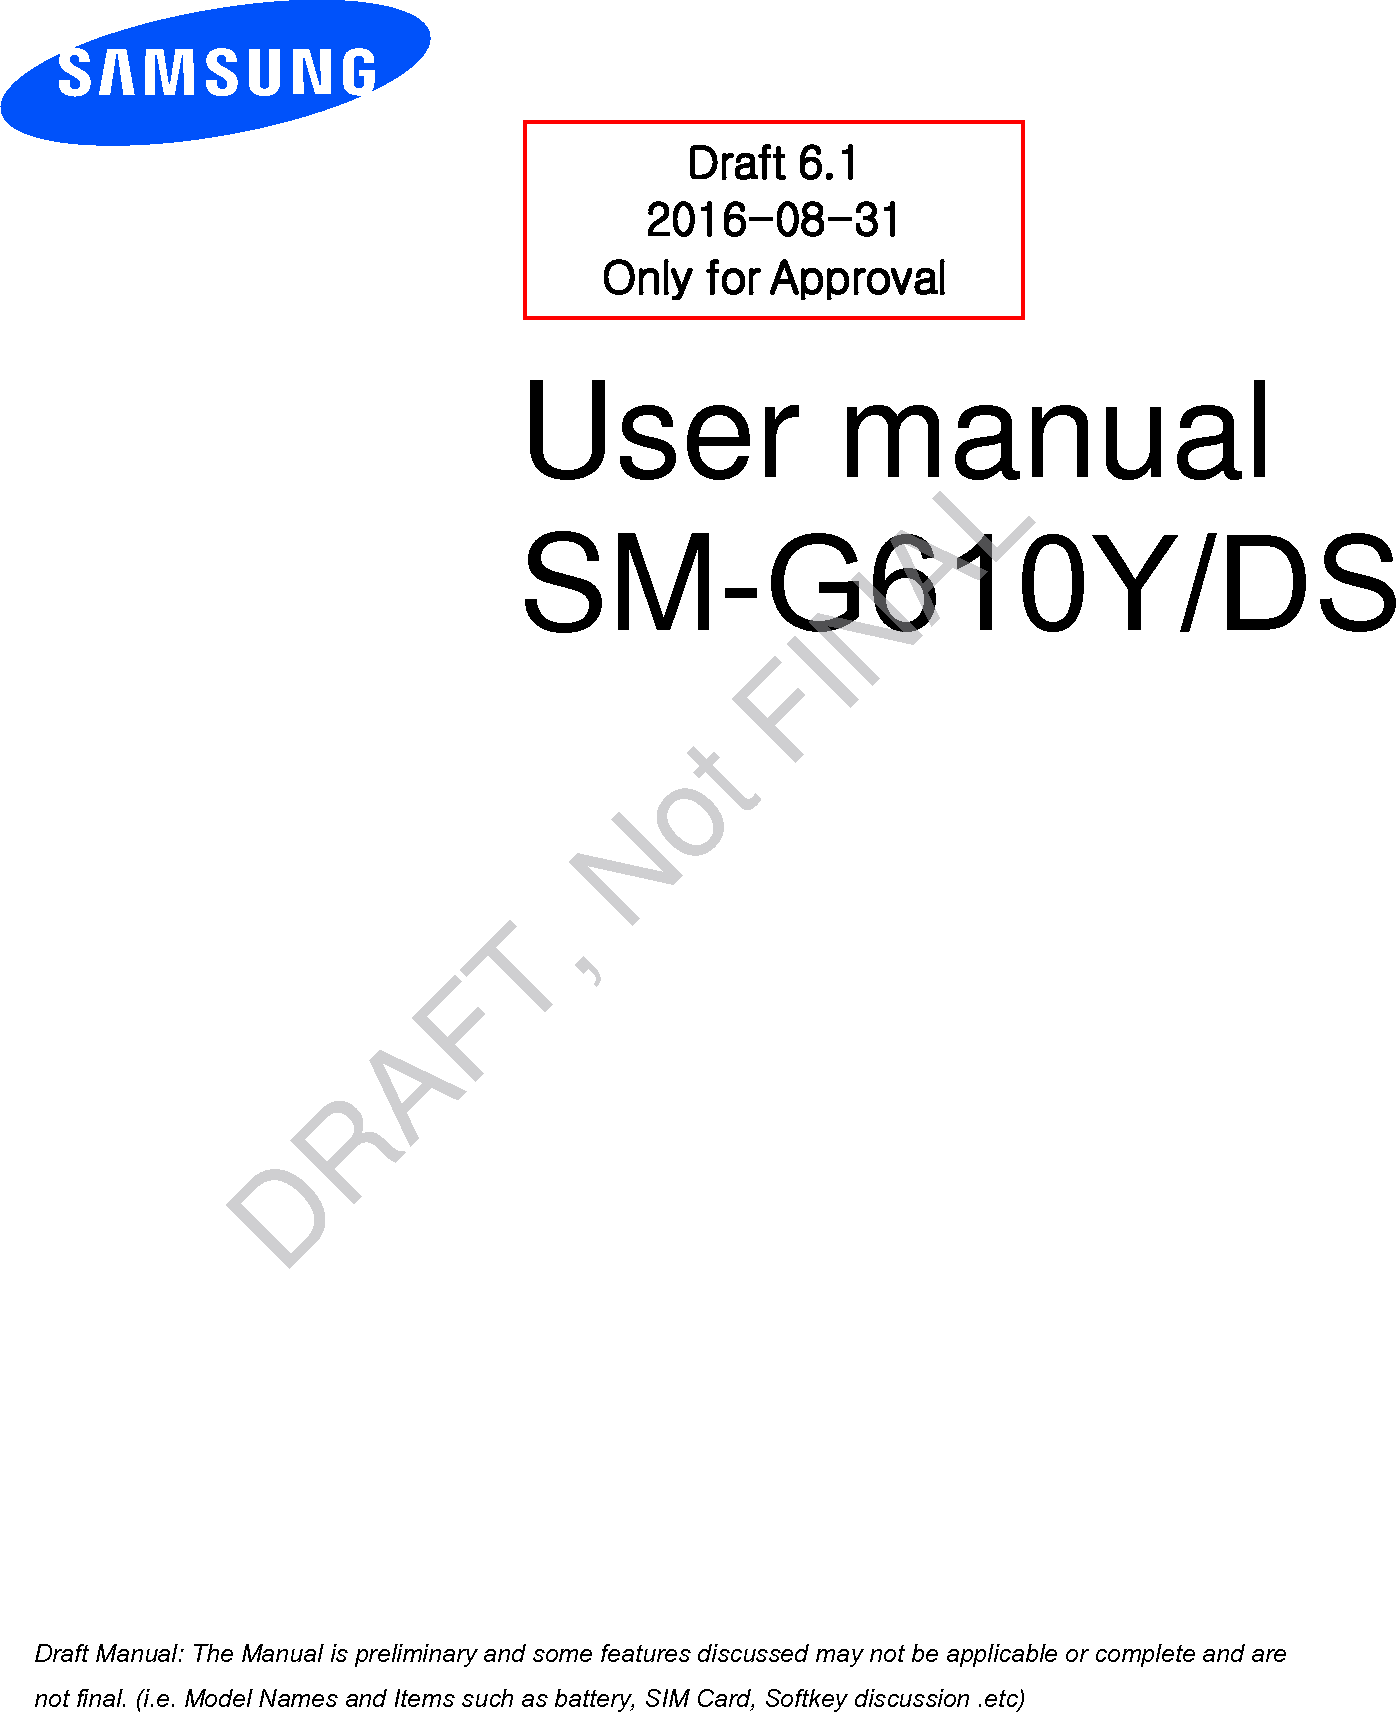 User manual SM-G610Y/DS Draft 6.1 2016-08-31 Only for Approval a ana  ana  na and  a dd a n  aa   and a n na  d a and   a a  ad  dn DRAFT, Not FINAL